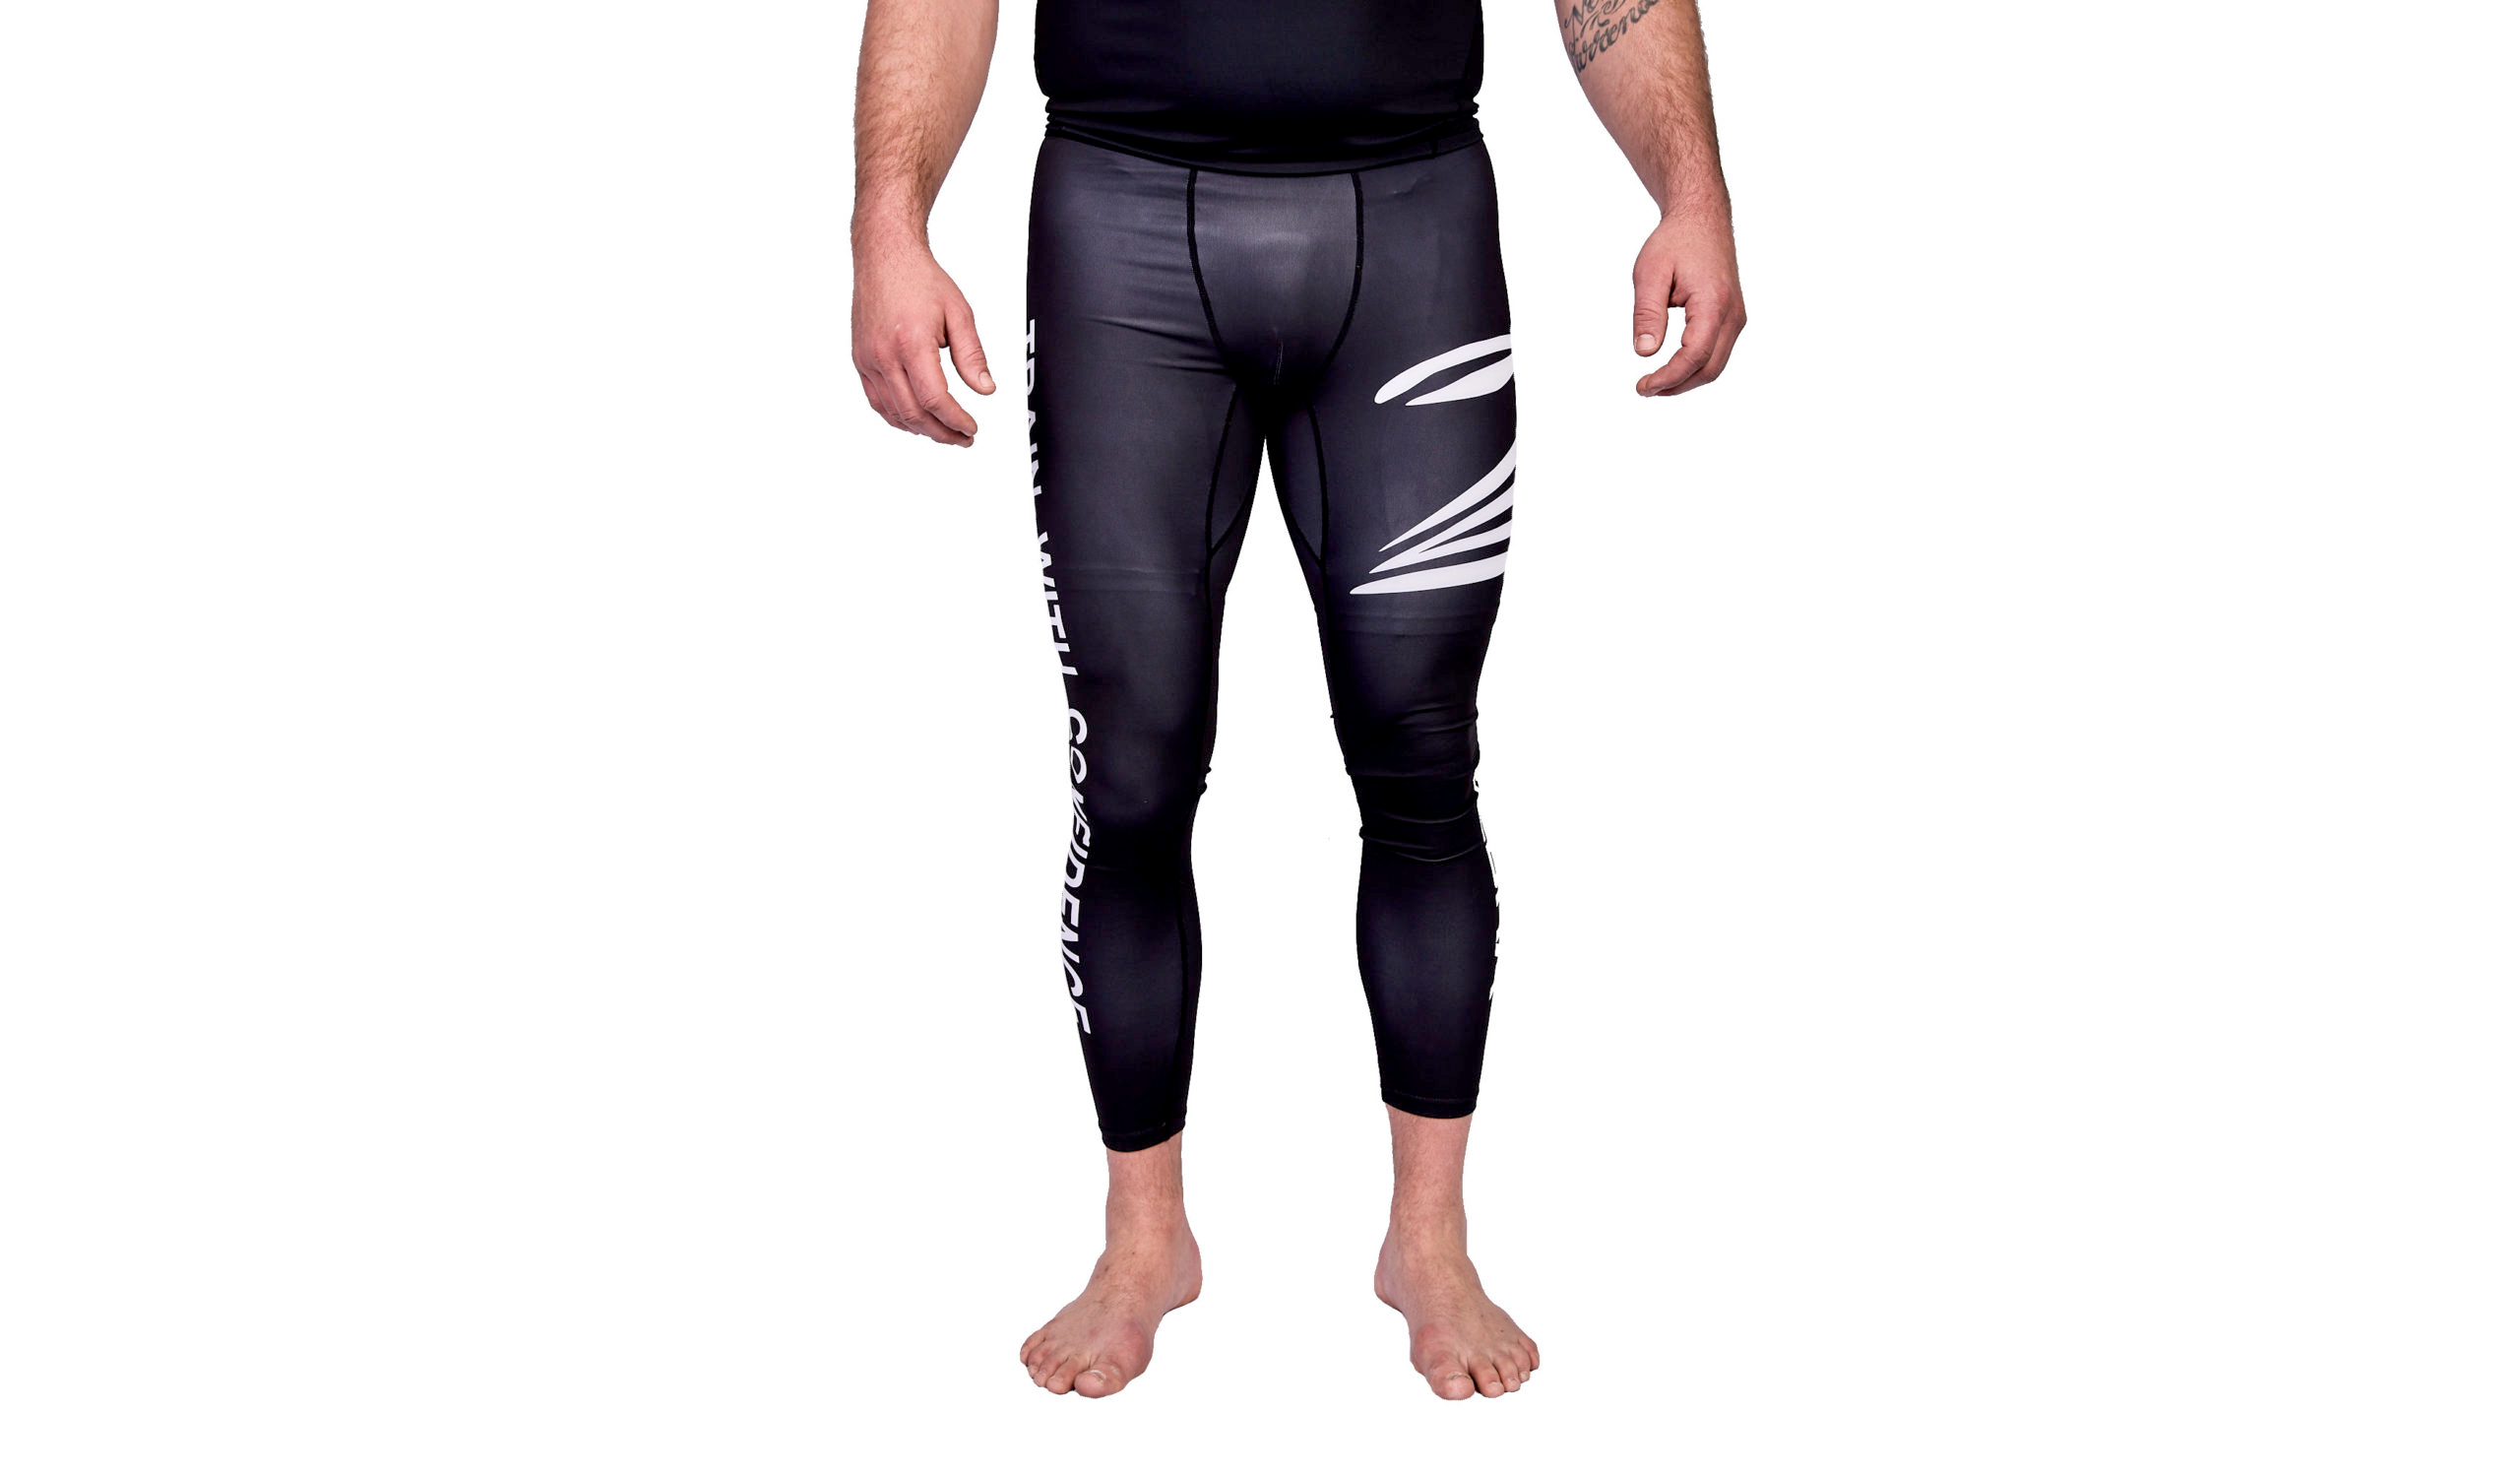 ZEBRA MMA / BJJ Spats for Males front view